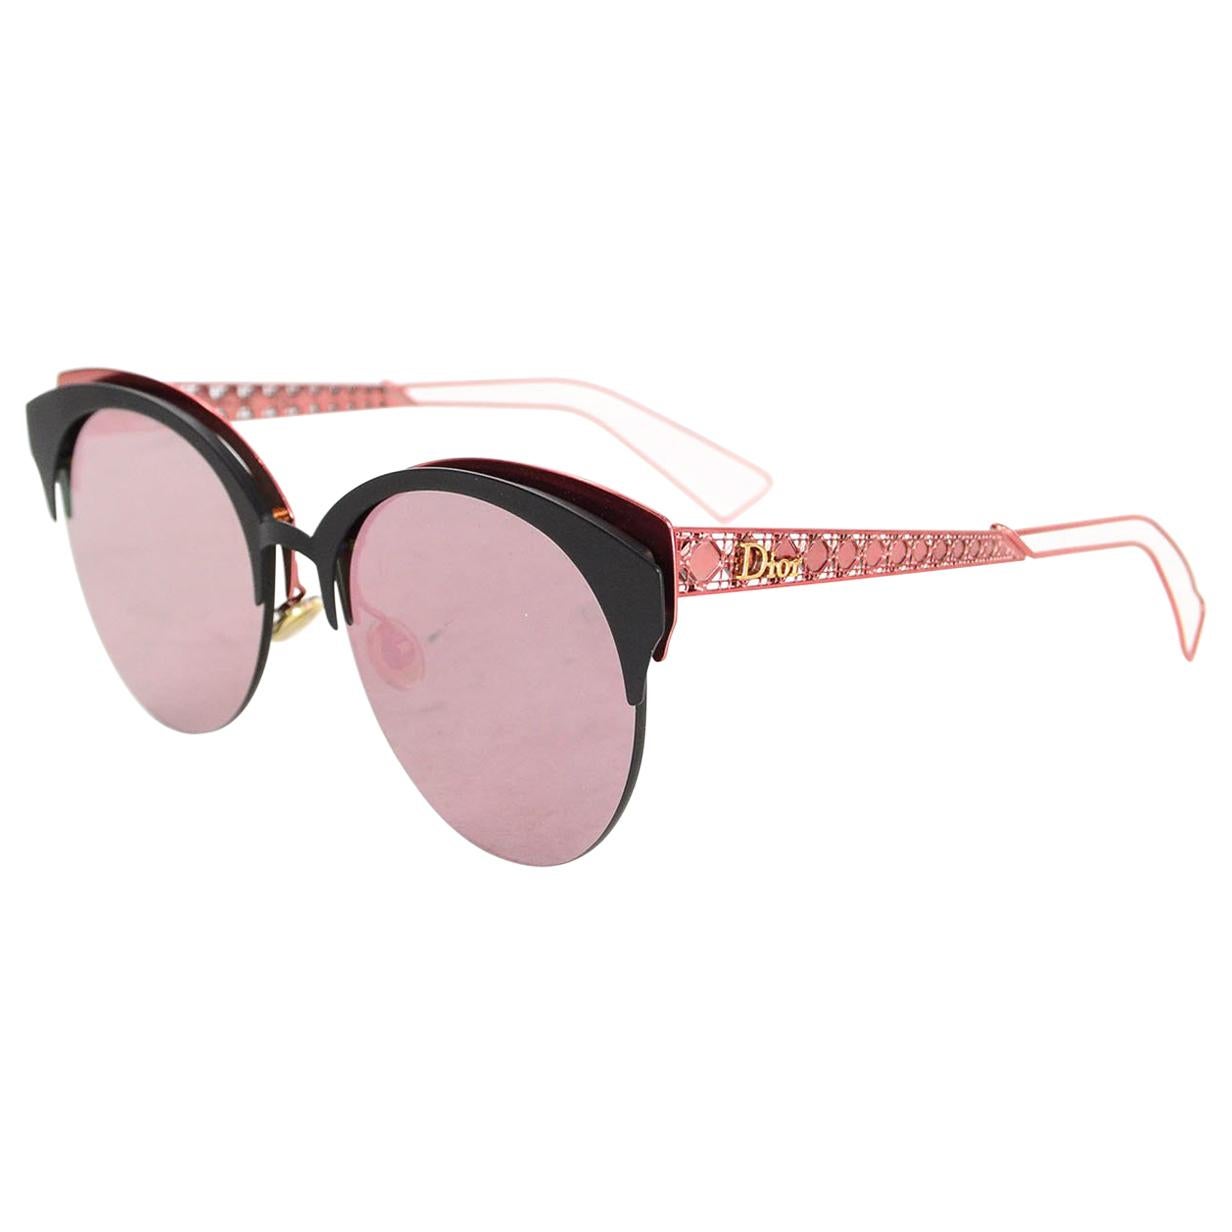 Christian Dior Pink & Black Diorama Mirrored Sunglasses with Case